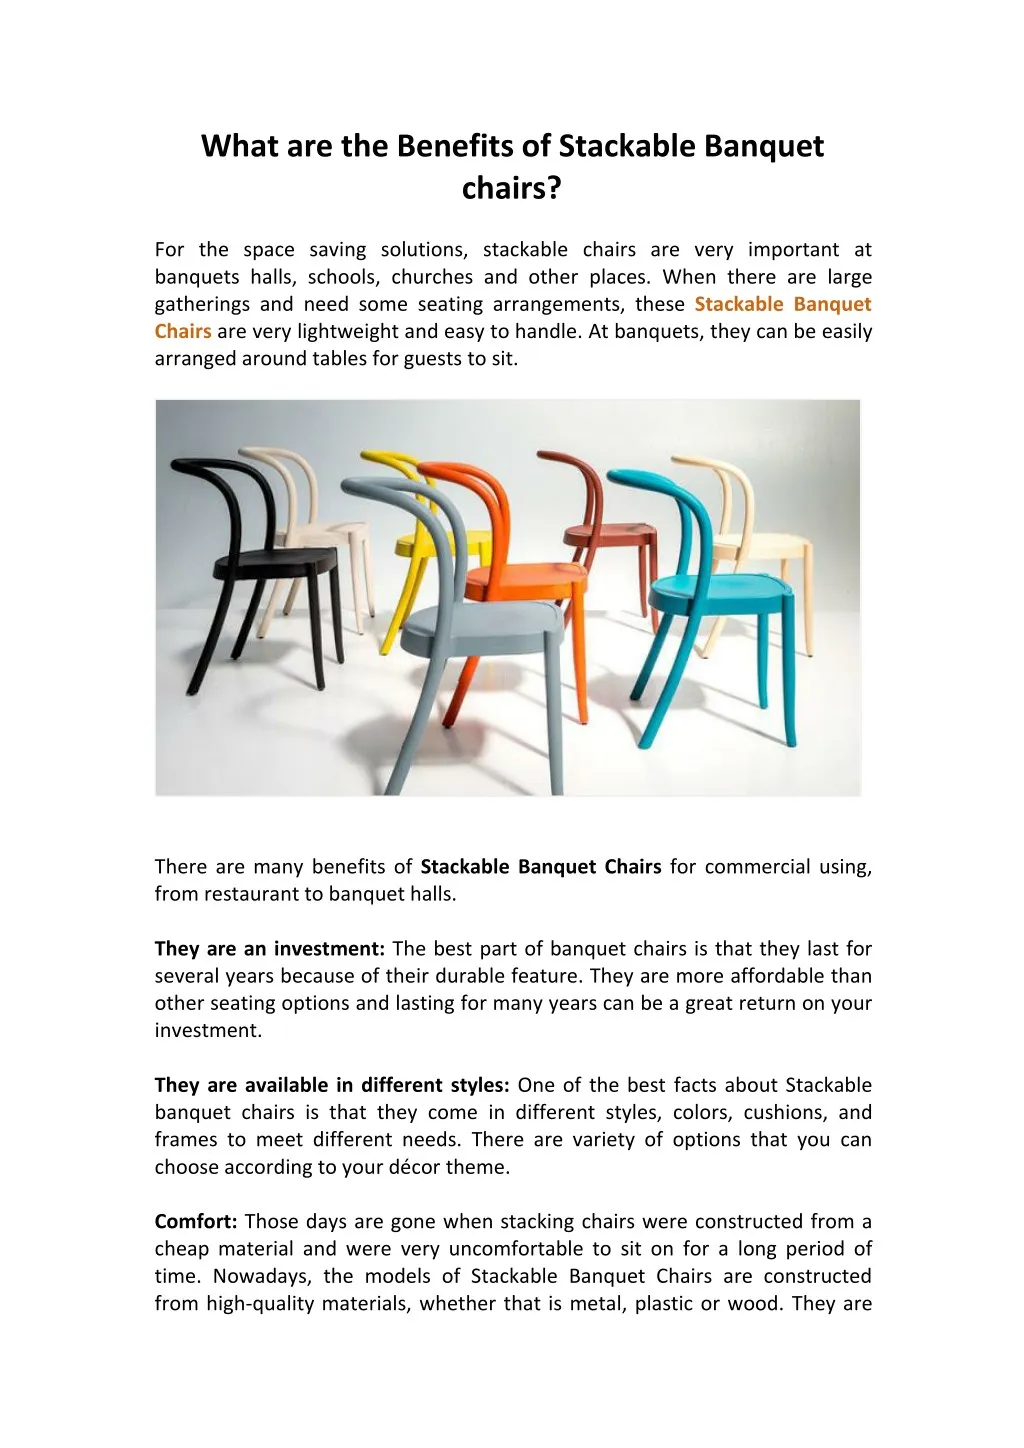 what are the benefits of stackable banquet chairs